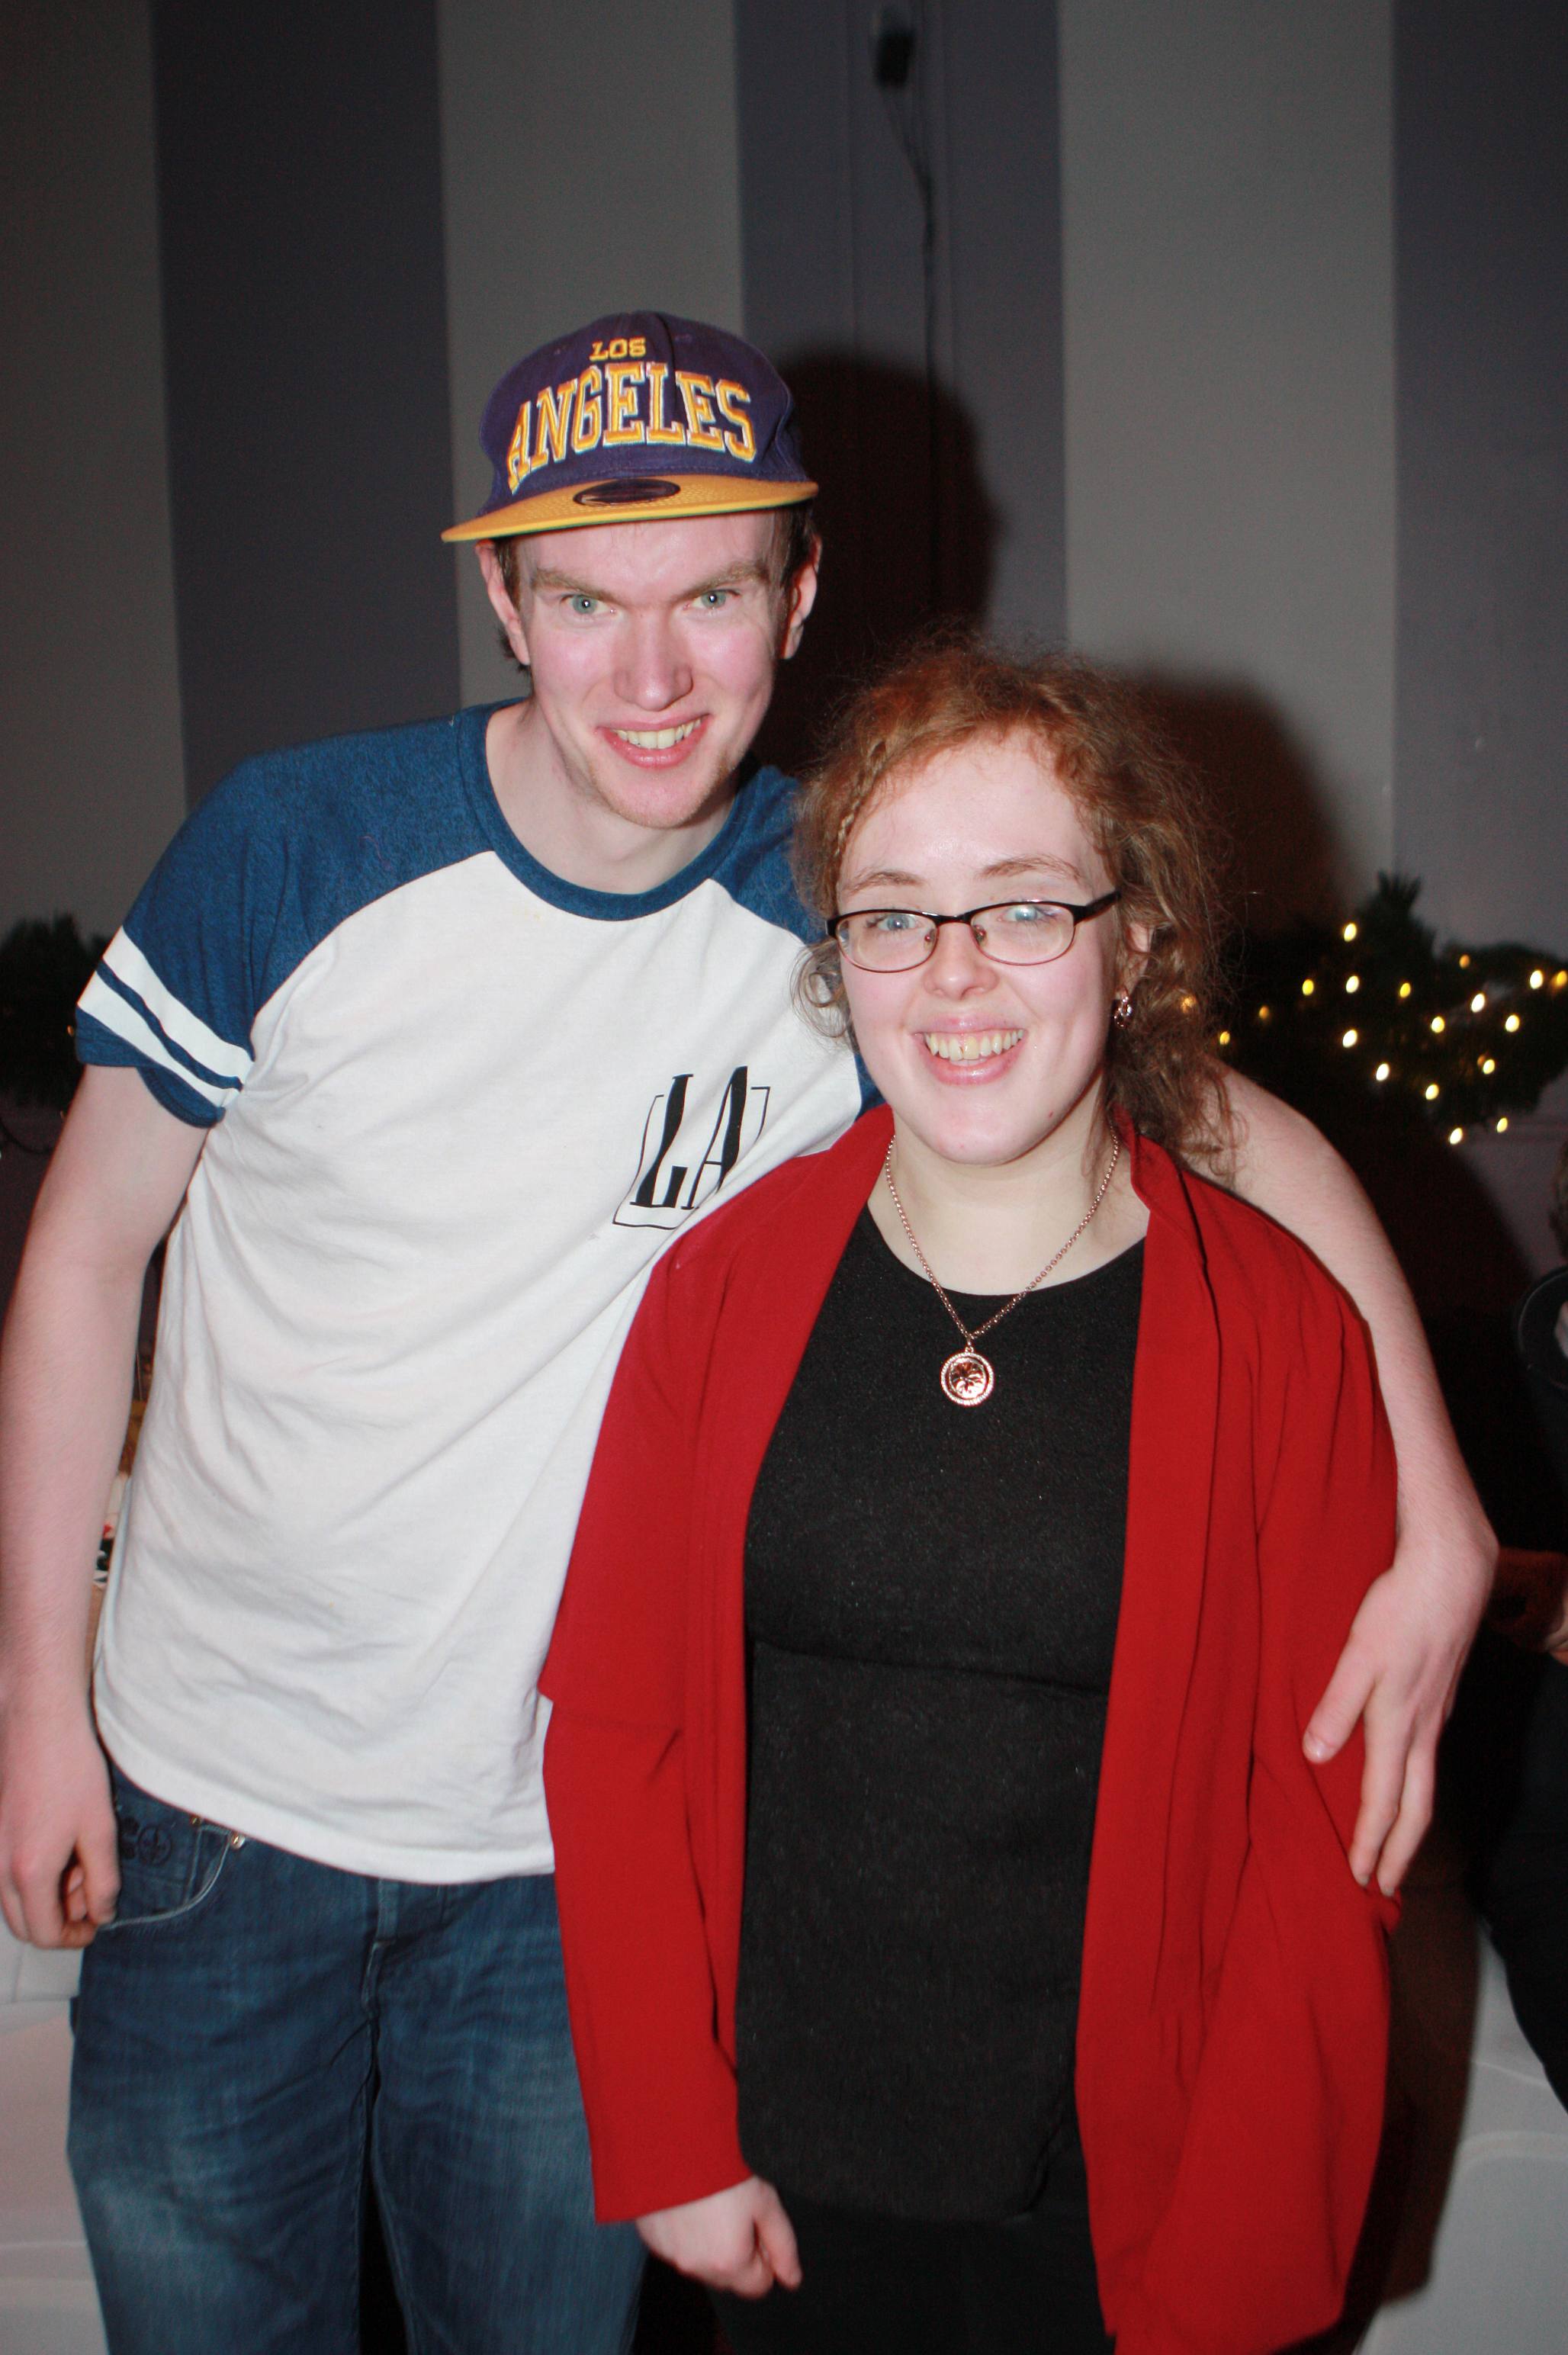 Michael O'Donnell and Laura Dorrian pictured at the LK Strikers Christmas Party